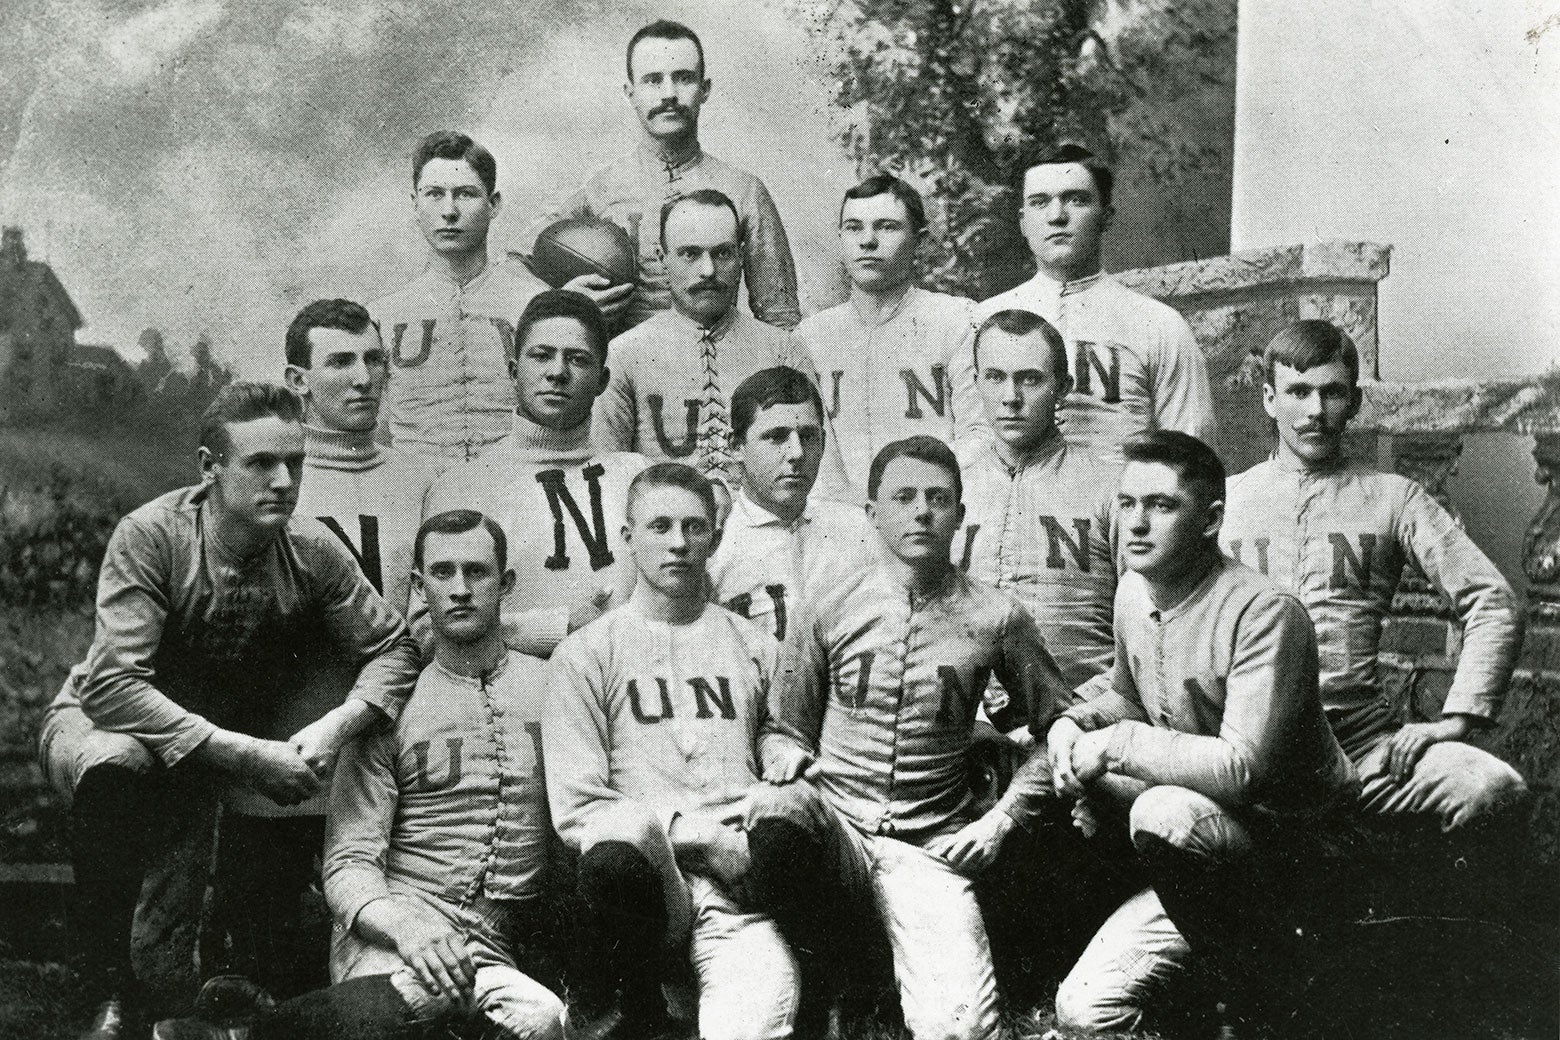 Black-and-white photo of an old-fashioned football team posing for the camera.